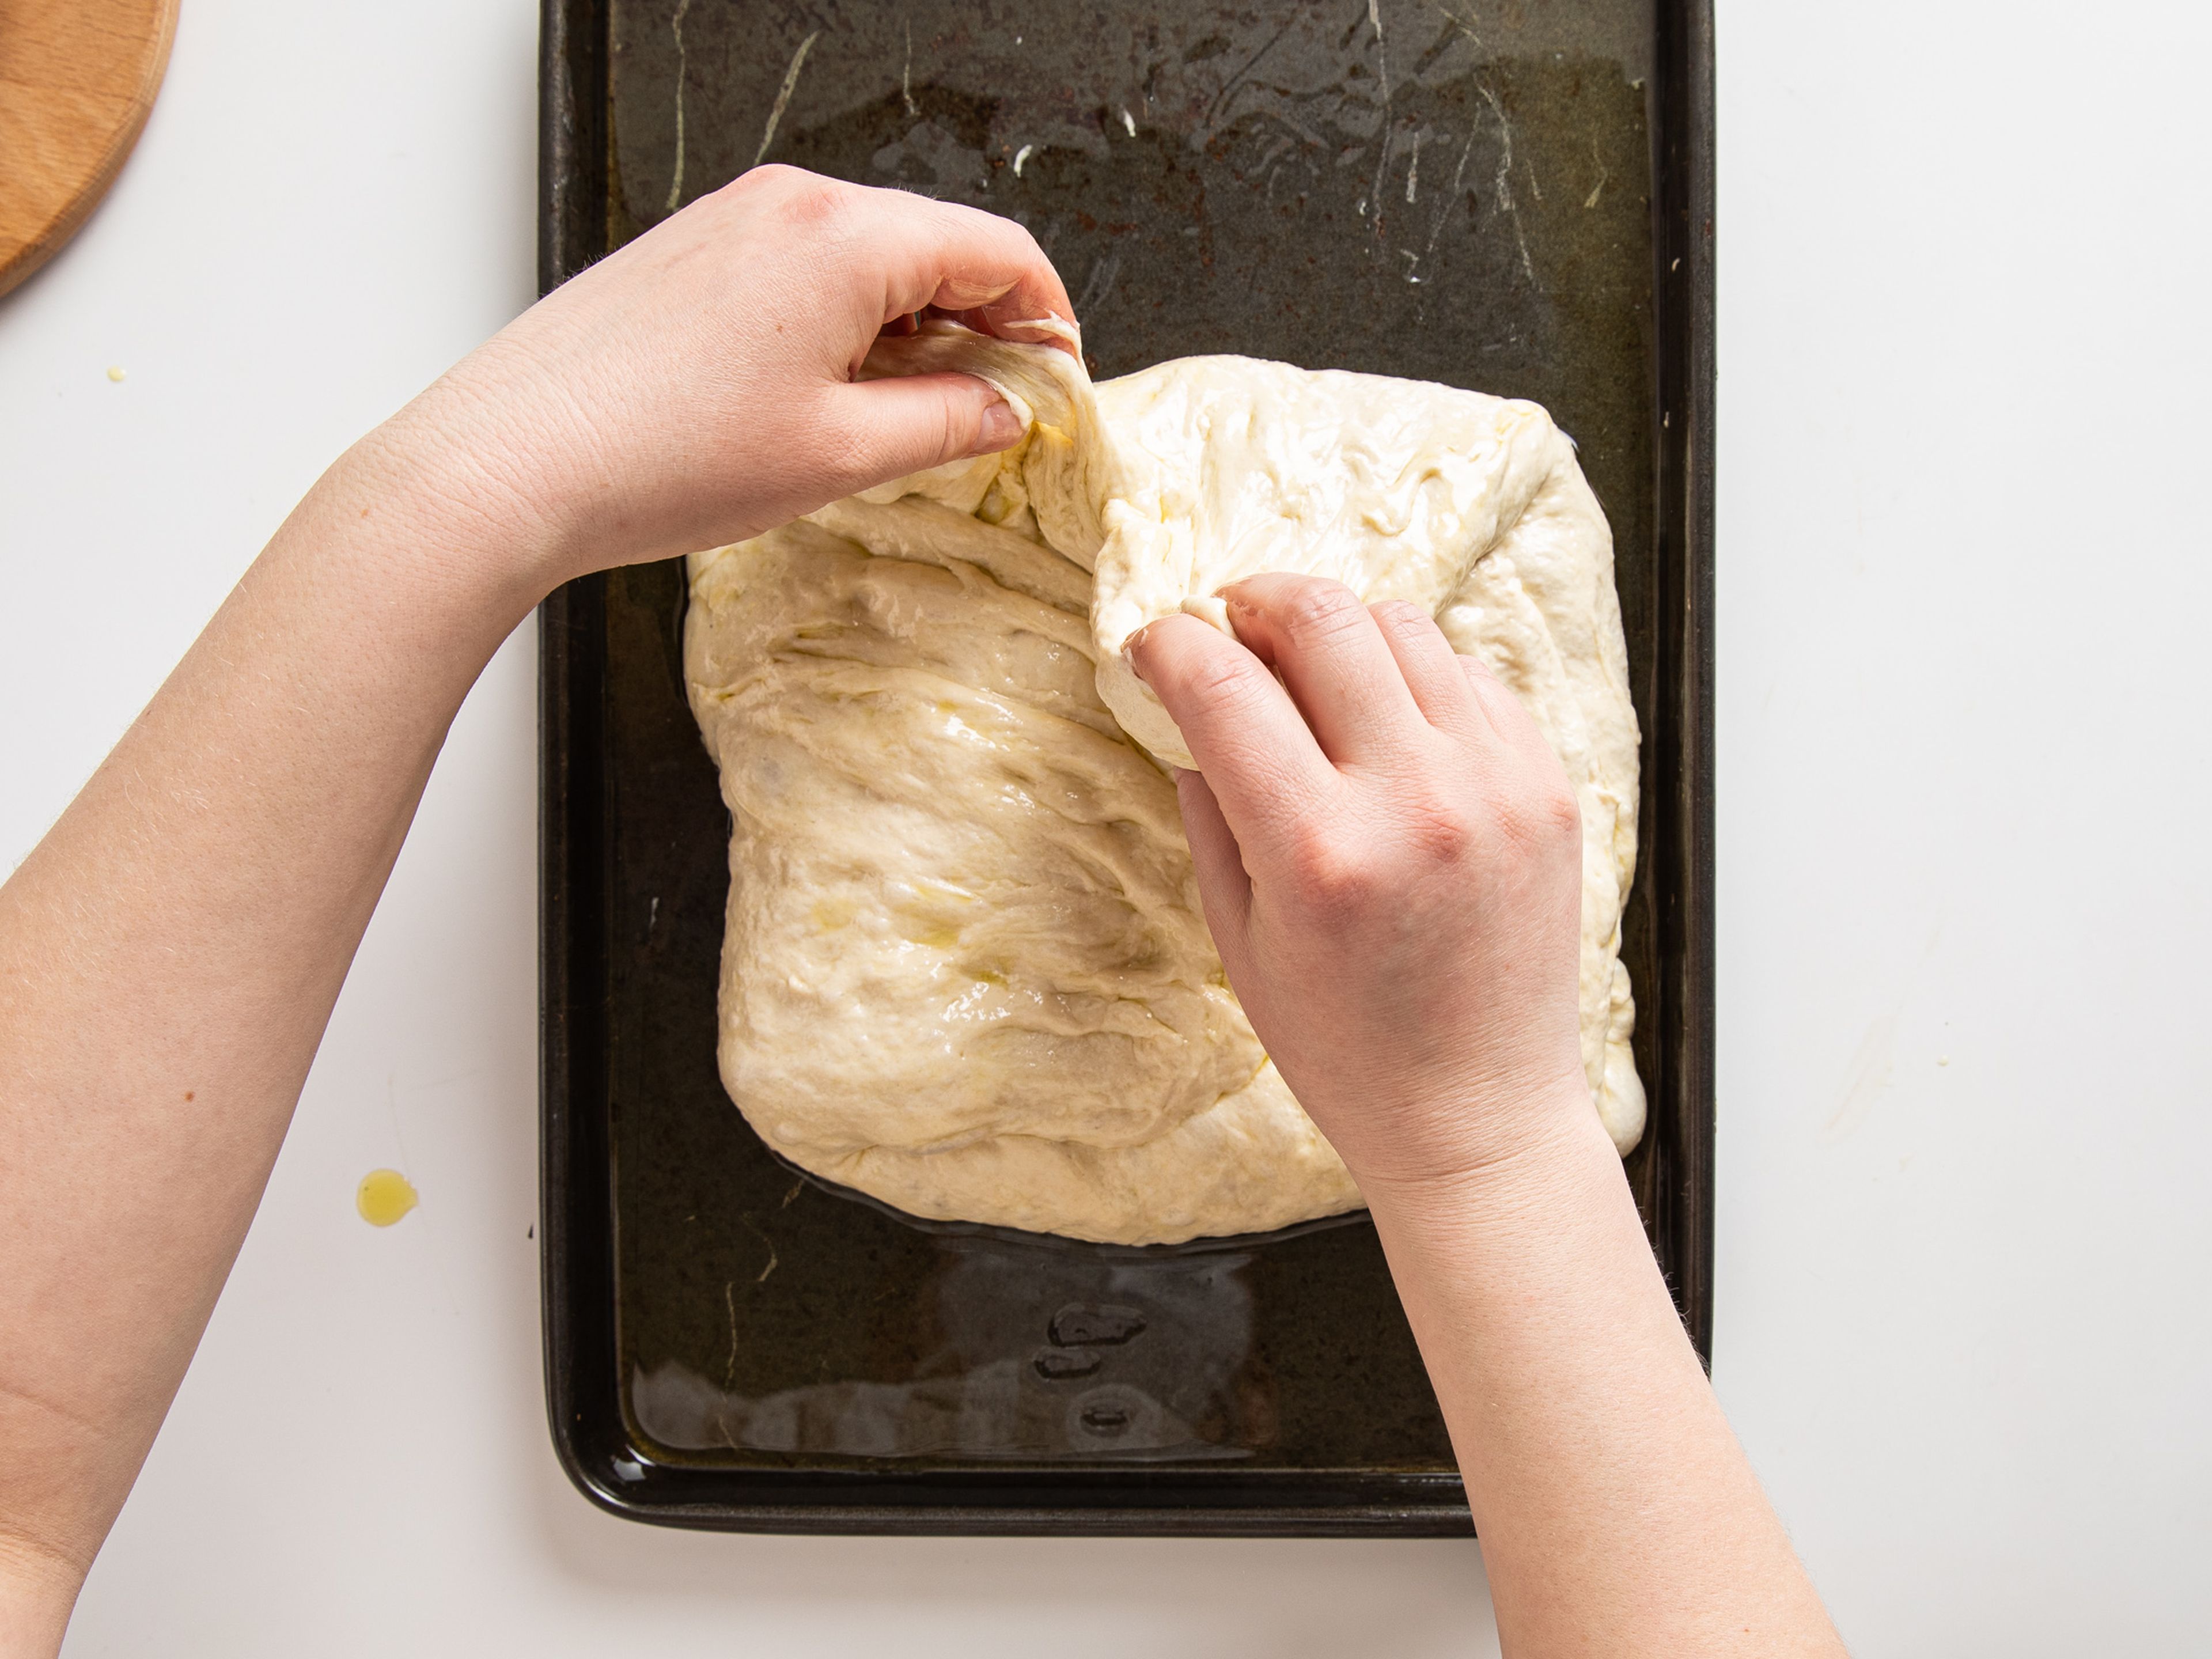 Drizzle oil onto a rimmed baking sheet and spread it around to coat the entire inside of the sheet pan. Transfer dough into it, and fold each of the edges in to the middle of the dough to trap some air. Let it relax for a moment and gently push it out to fit the tray. Leave to rest for 1 hr at room temperature.